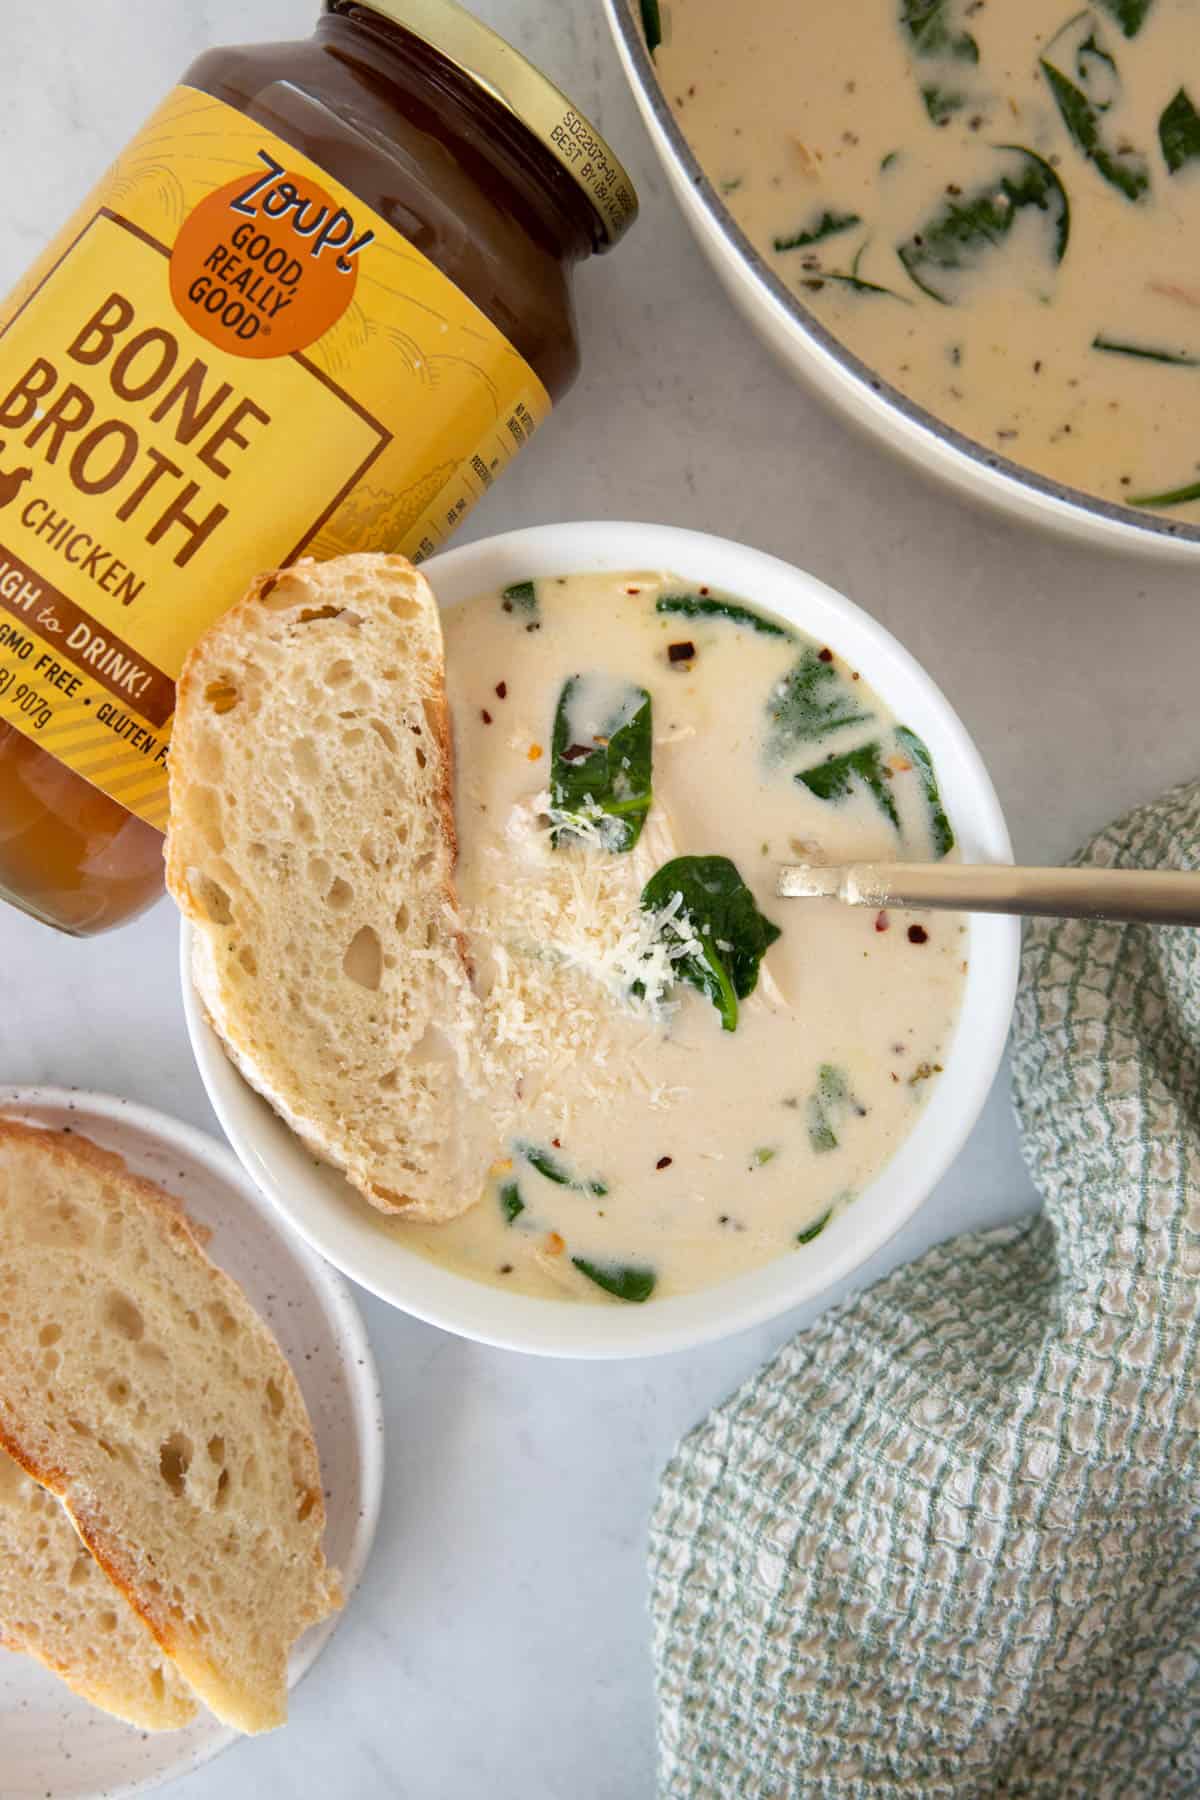 A spoon sits in a bowl of creamy chicken florentine soup with a jar of zoup good real good bone broth on the side.